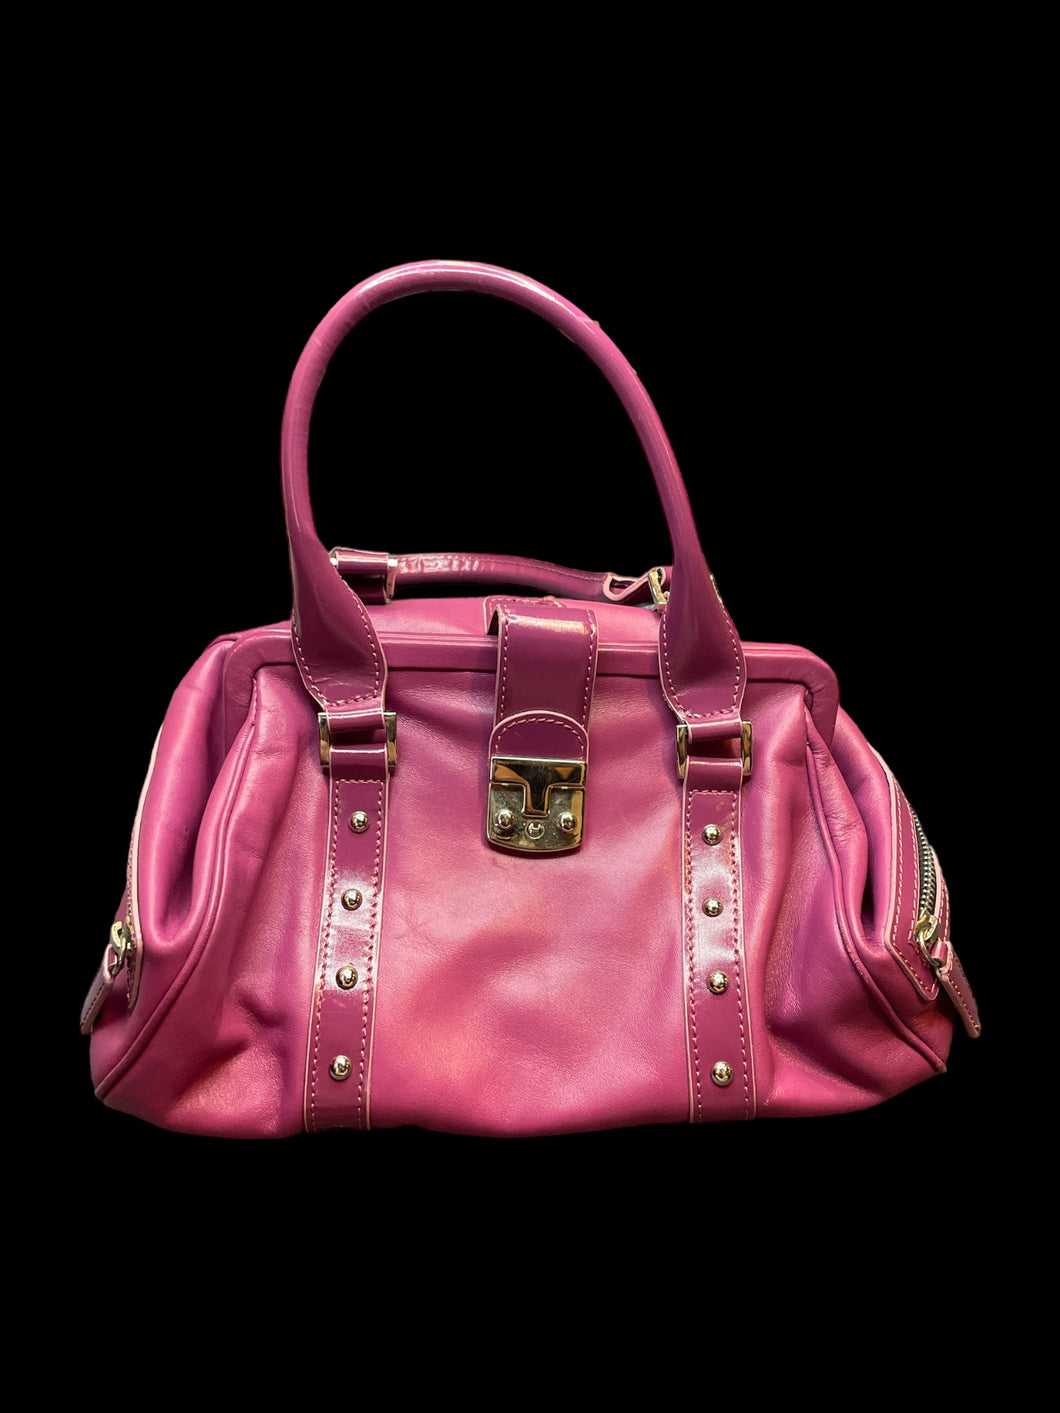 Fuchsia leather doctor-style bag w/ silver-like hardware, & latching clasp